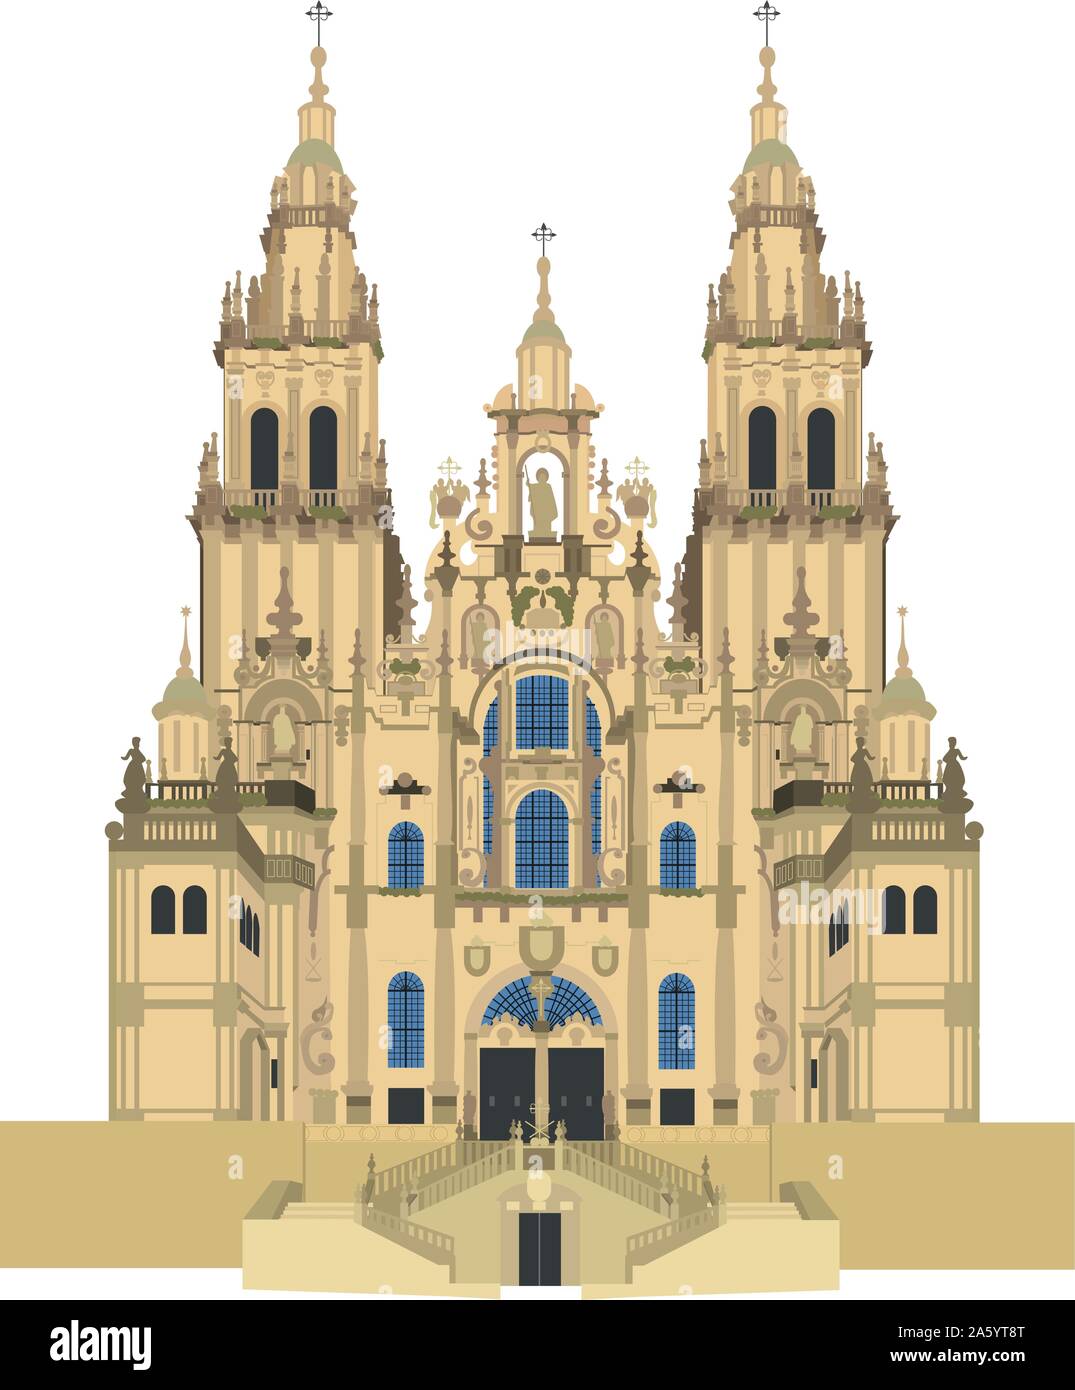 Santiago de Compostela Cathedral, Spain. Isolated on white background vector illustration. Stock Vector